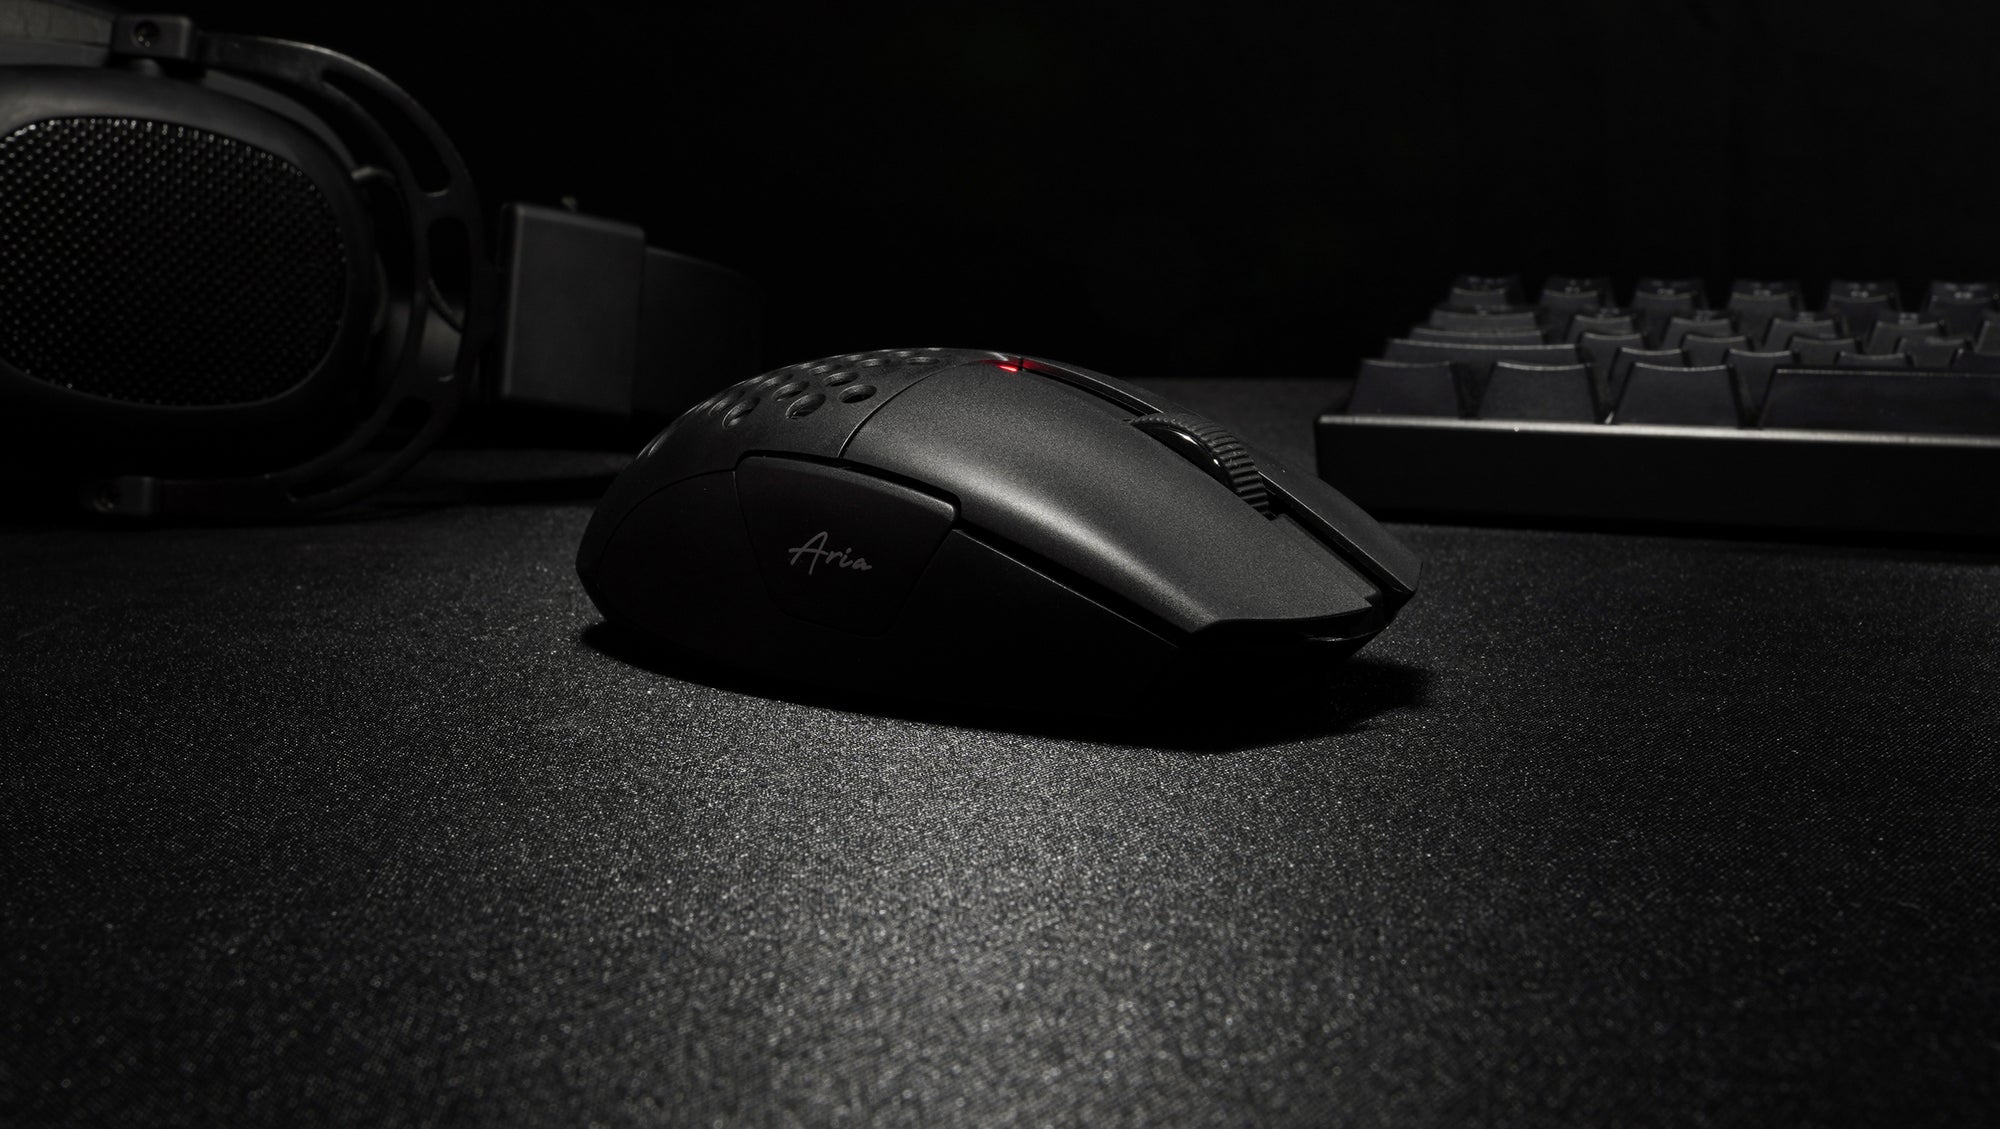 What is polling rate and how does it affect my mouse's performance?